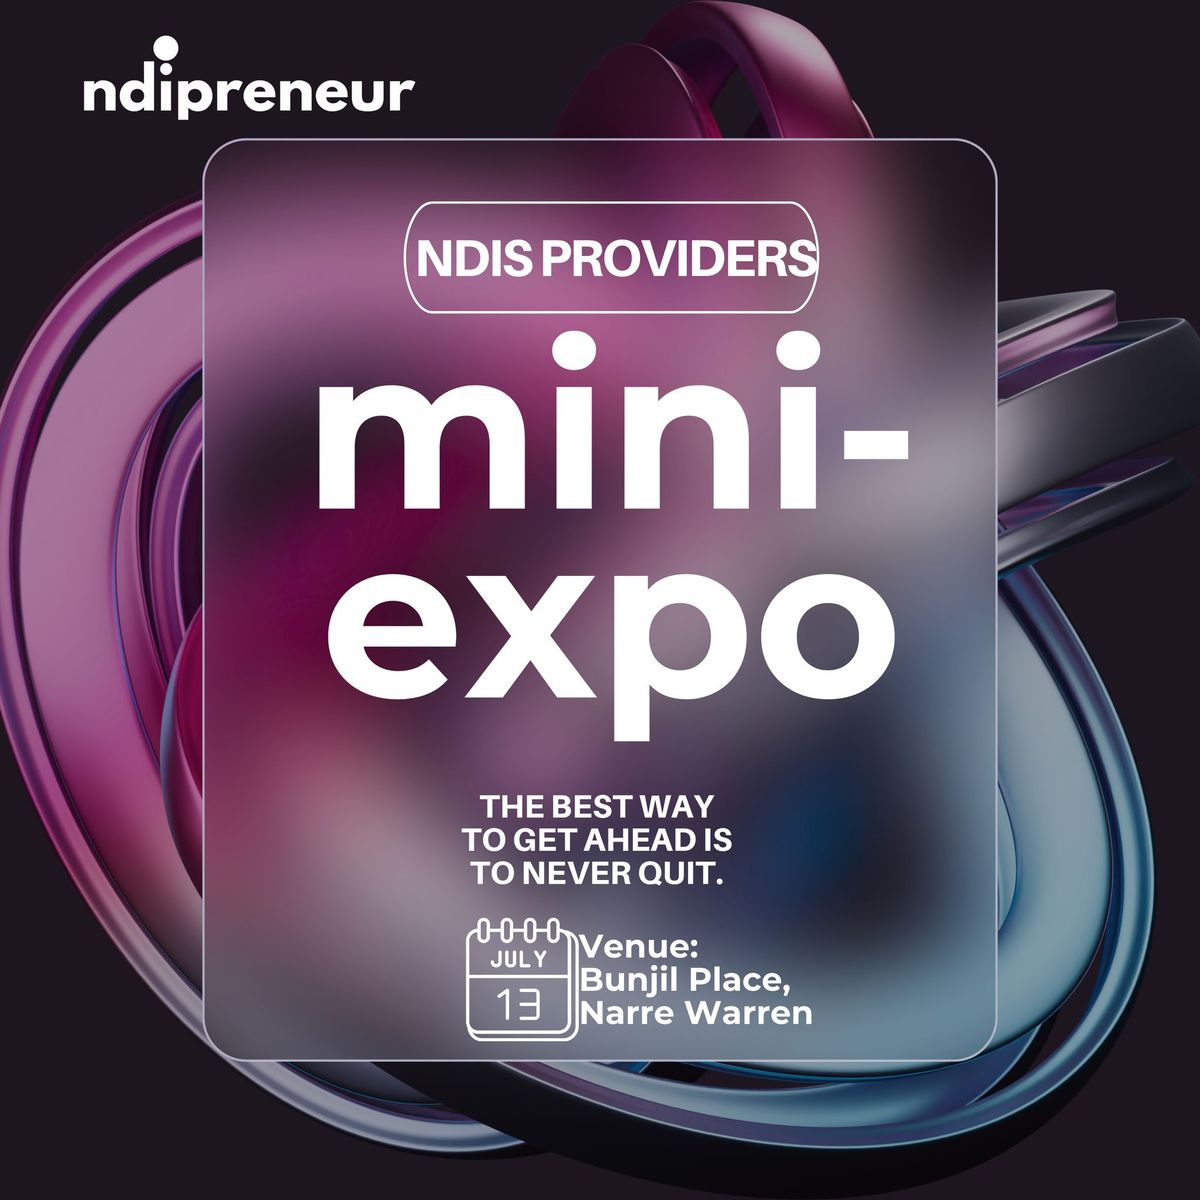 NDIS Expo - for providers